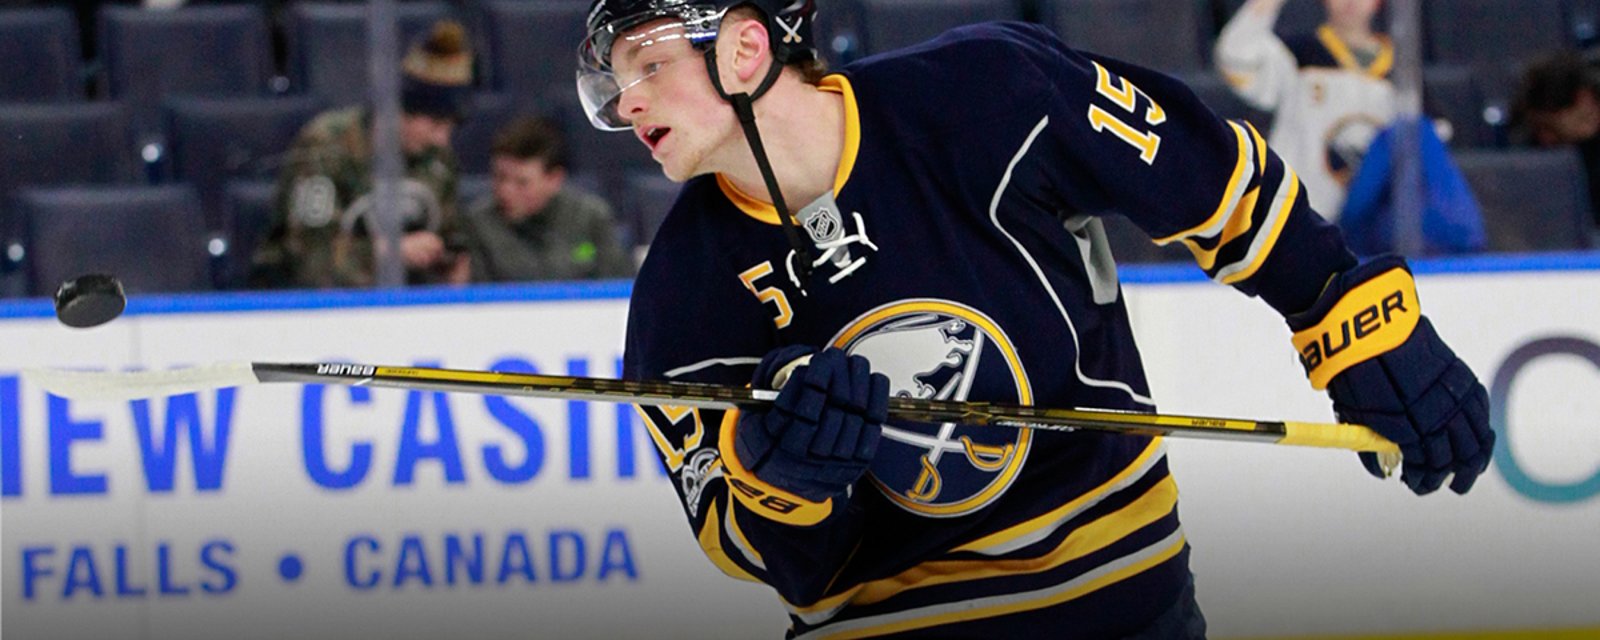 Report: Sabres’ Eichel criticizes NHL and has strong words for fellow players